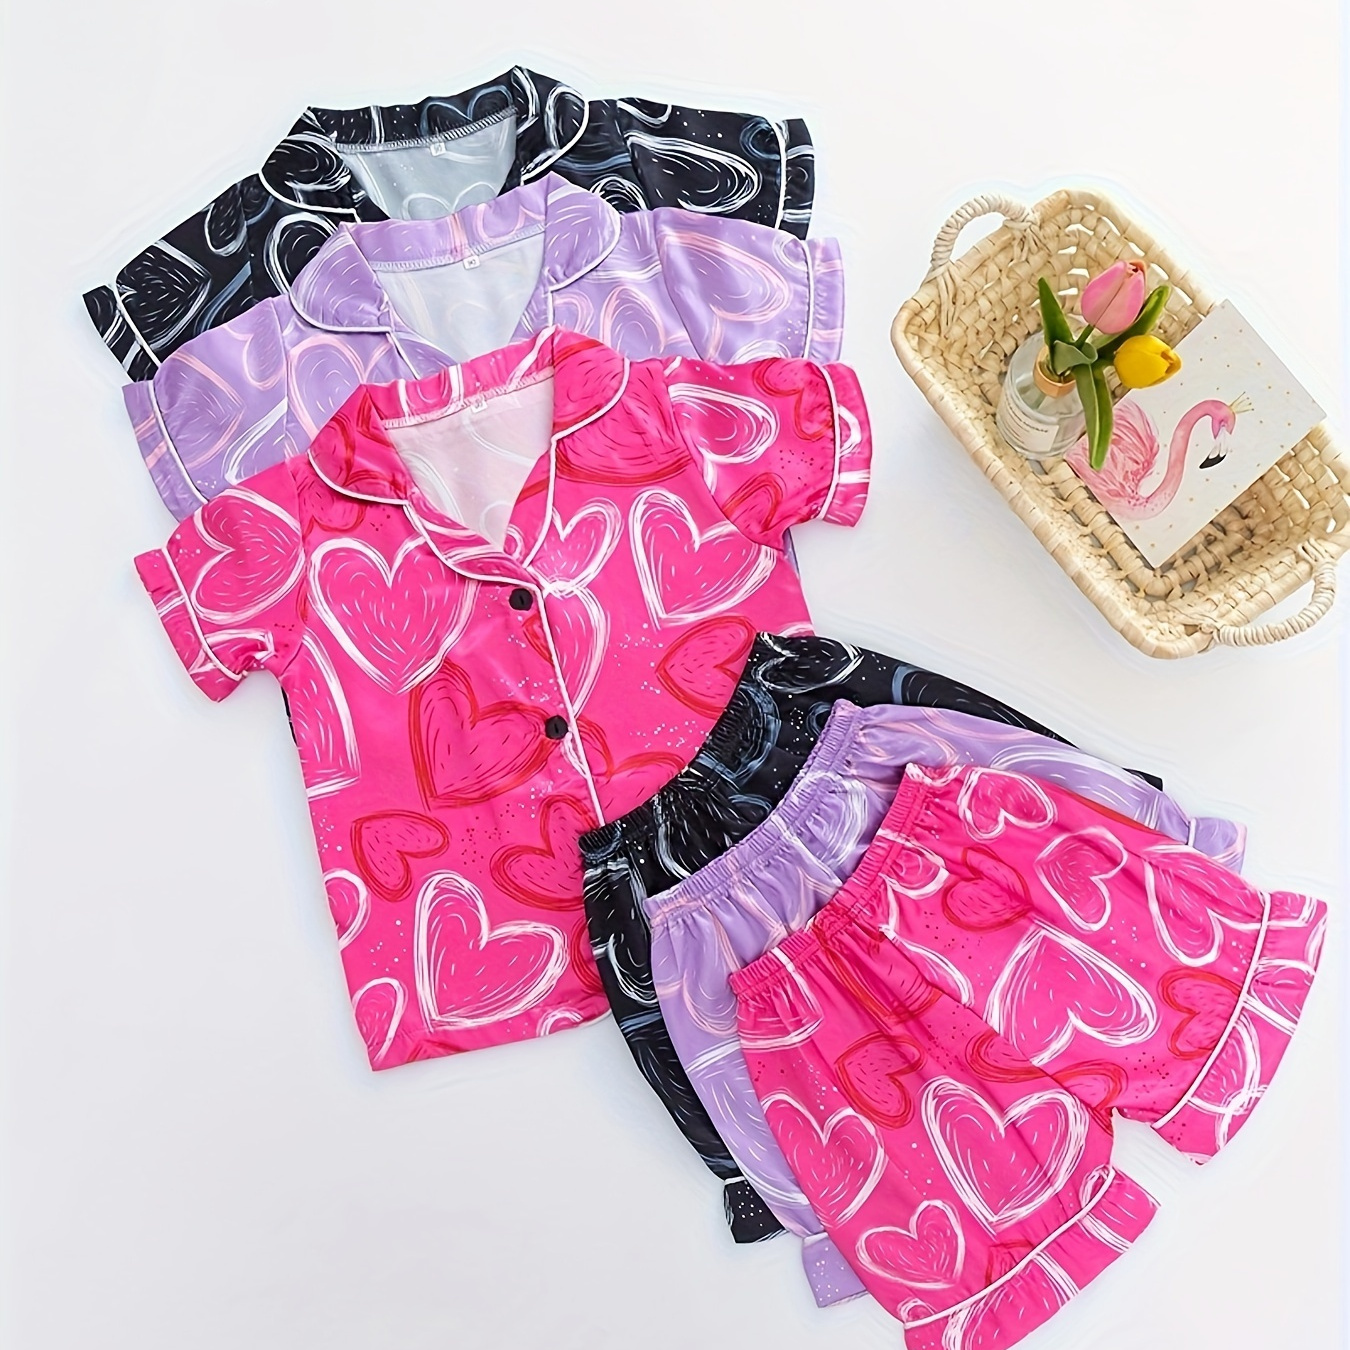 

3 Sets Girl's Casual Home Wear Set, Cute Heart Print Suit Collar Front Button Short Sleeve Shirt & Shorts, Comfy & Skin-friendly Set, As Daily Gift